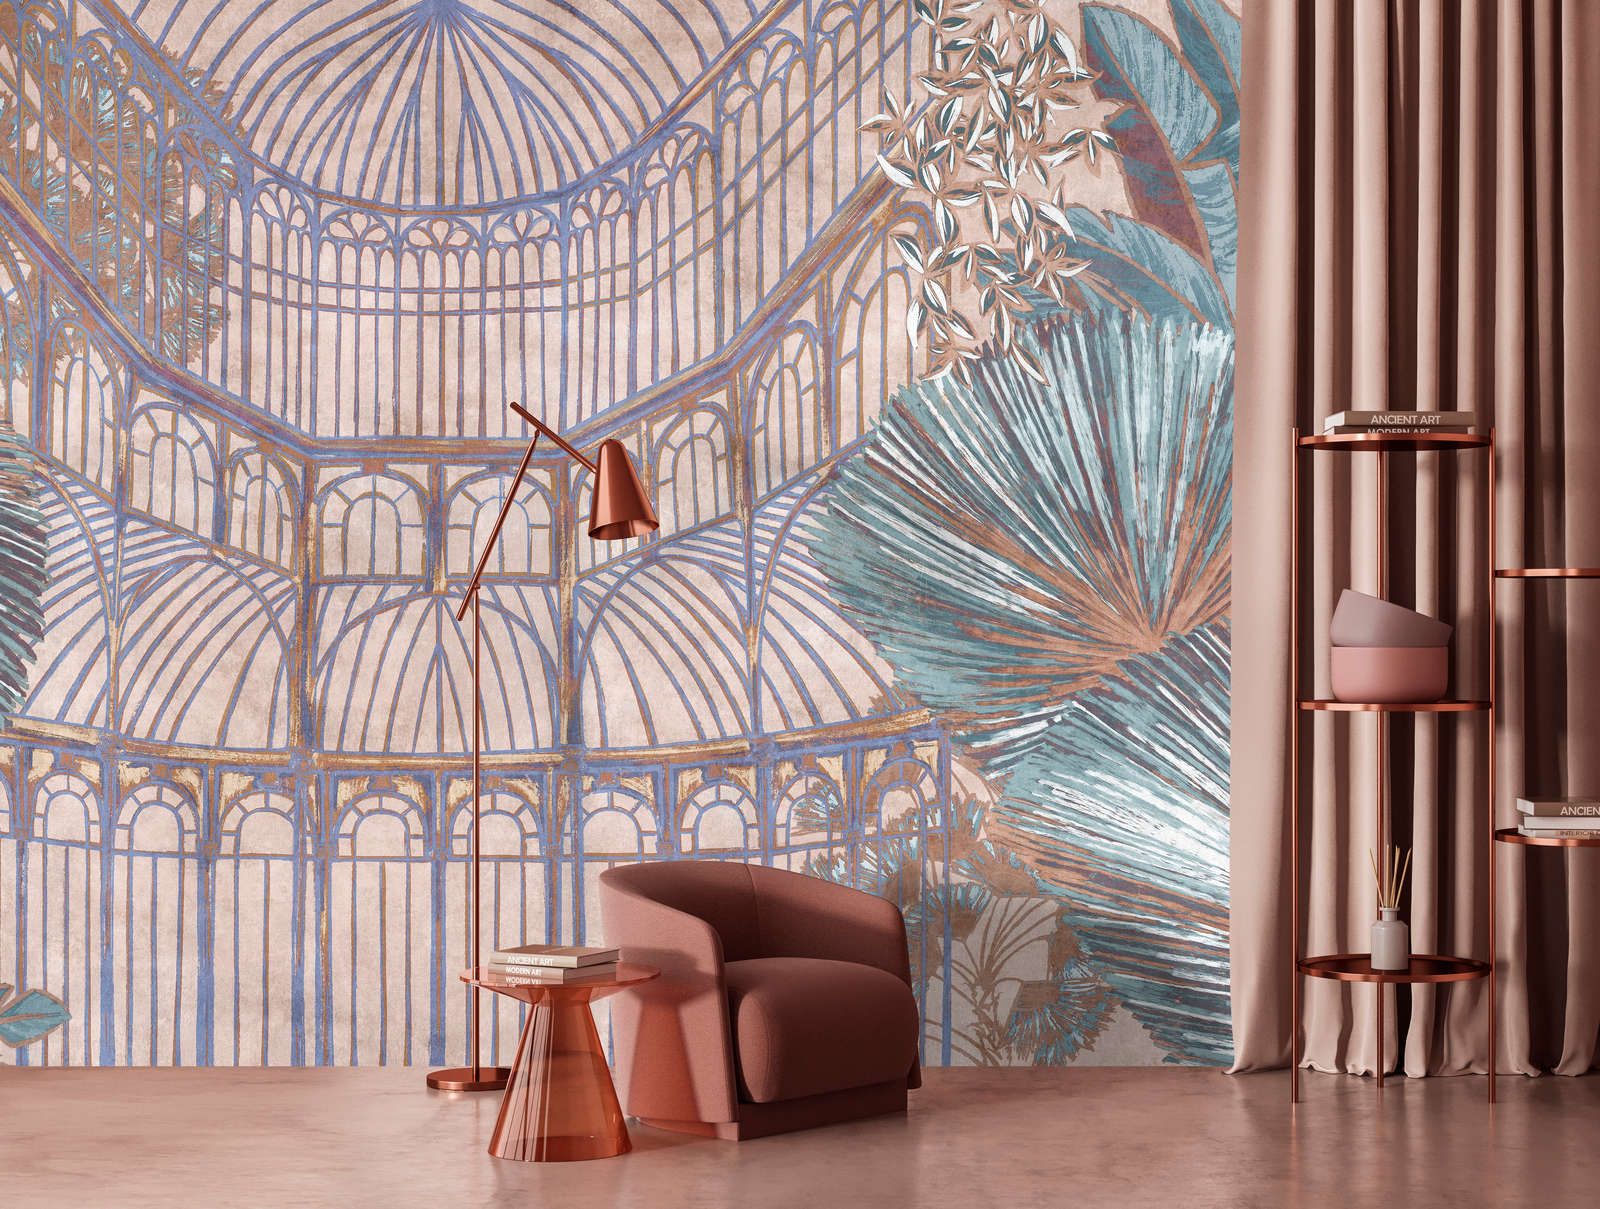             Photo wallpaper »orangerie 2« - Pavilion with jungle leaves on vintage plaster texture - Rosé, Turquoise | Matt, Smooth non-woven fabric
        